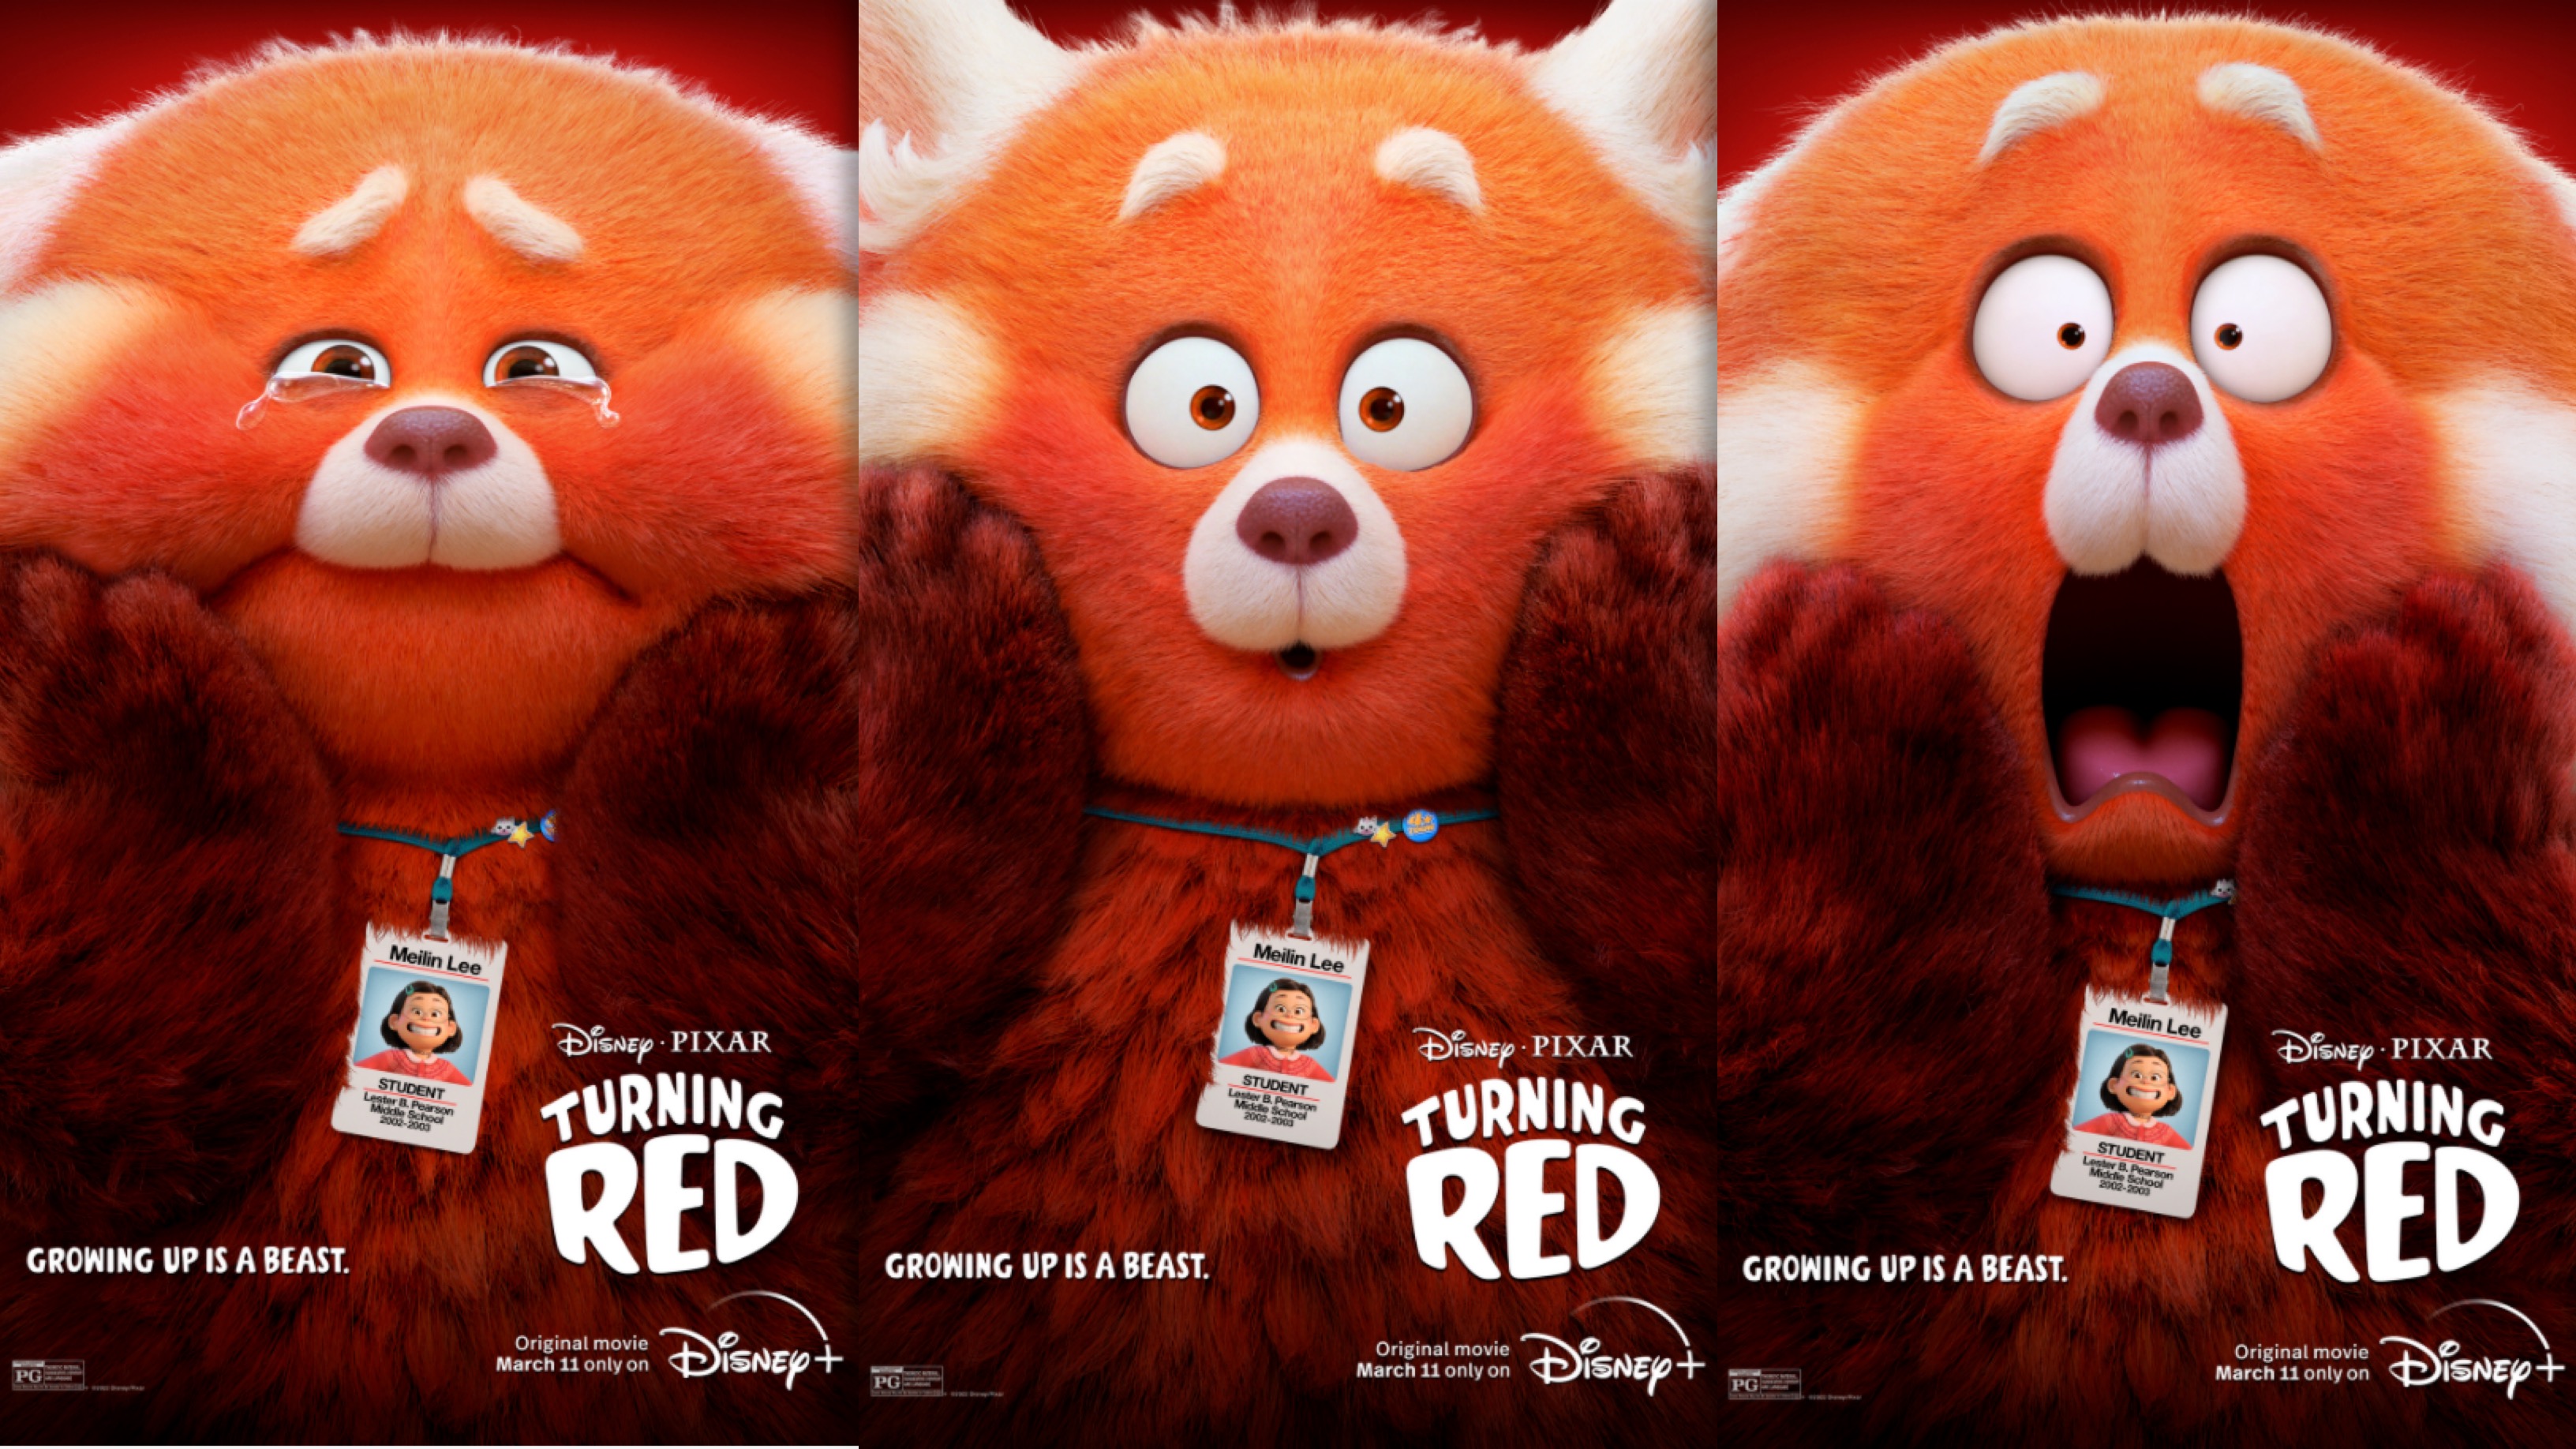 Pixar’s ‘Turning Red’ Hitting Disney+ in One Month, Check Out The New Posters